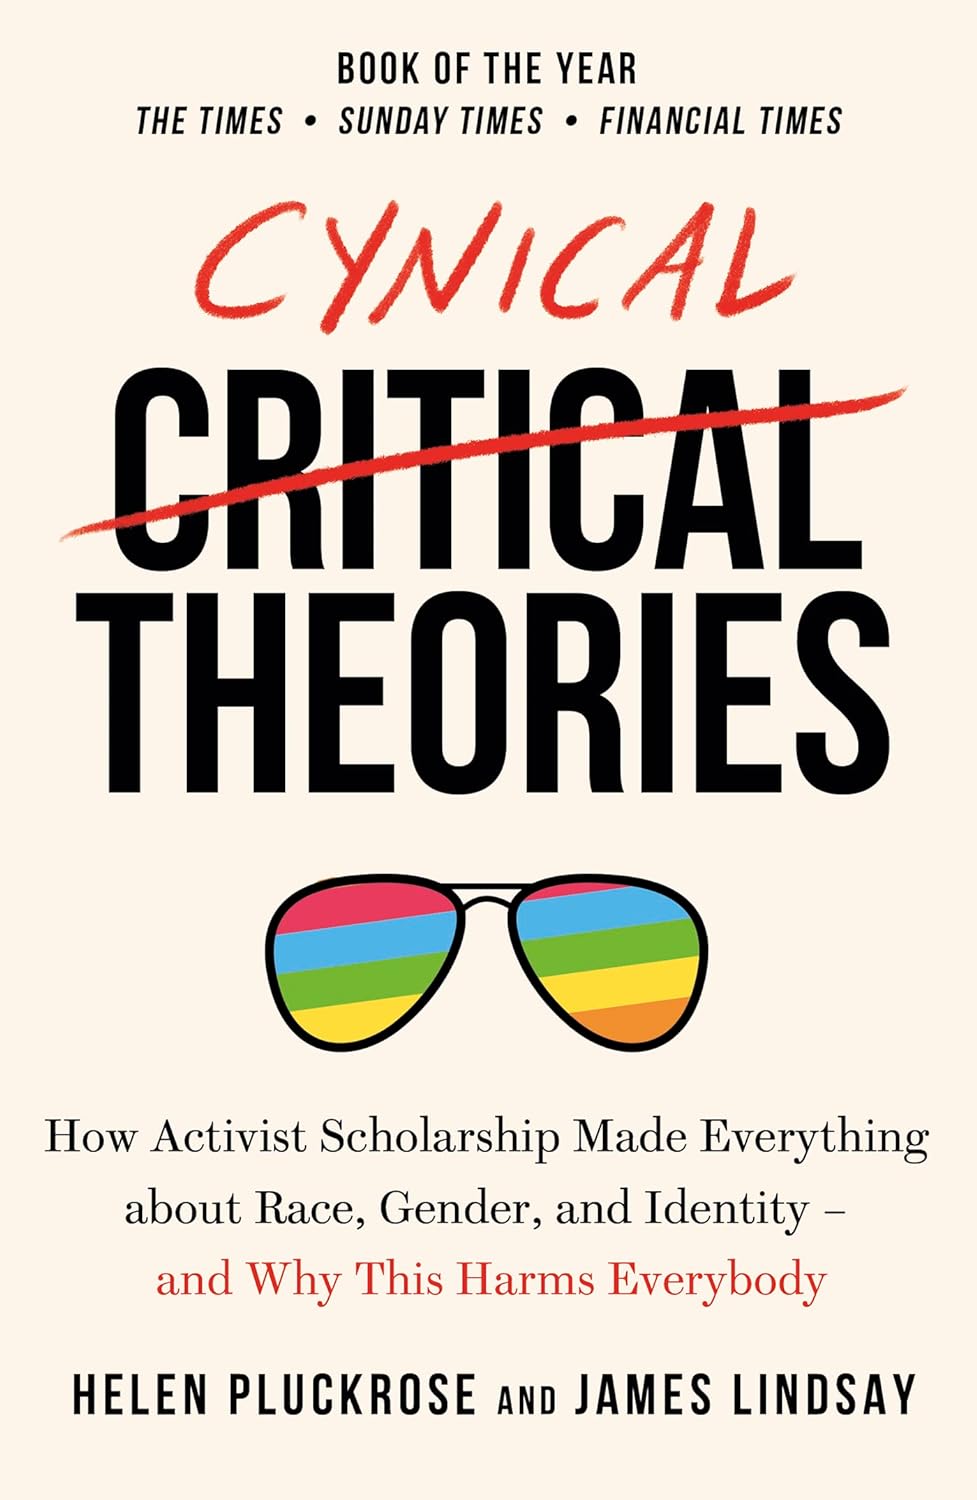 Cynical Theories by Helen Pluckrose and James Lindsay